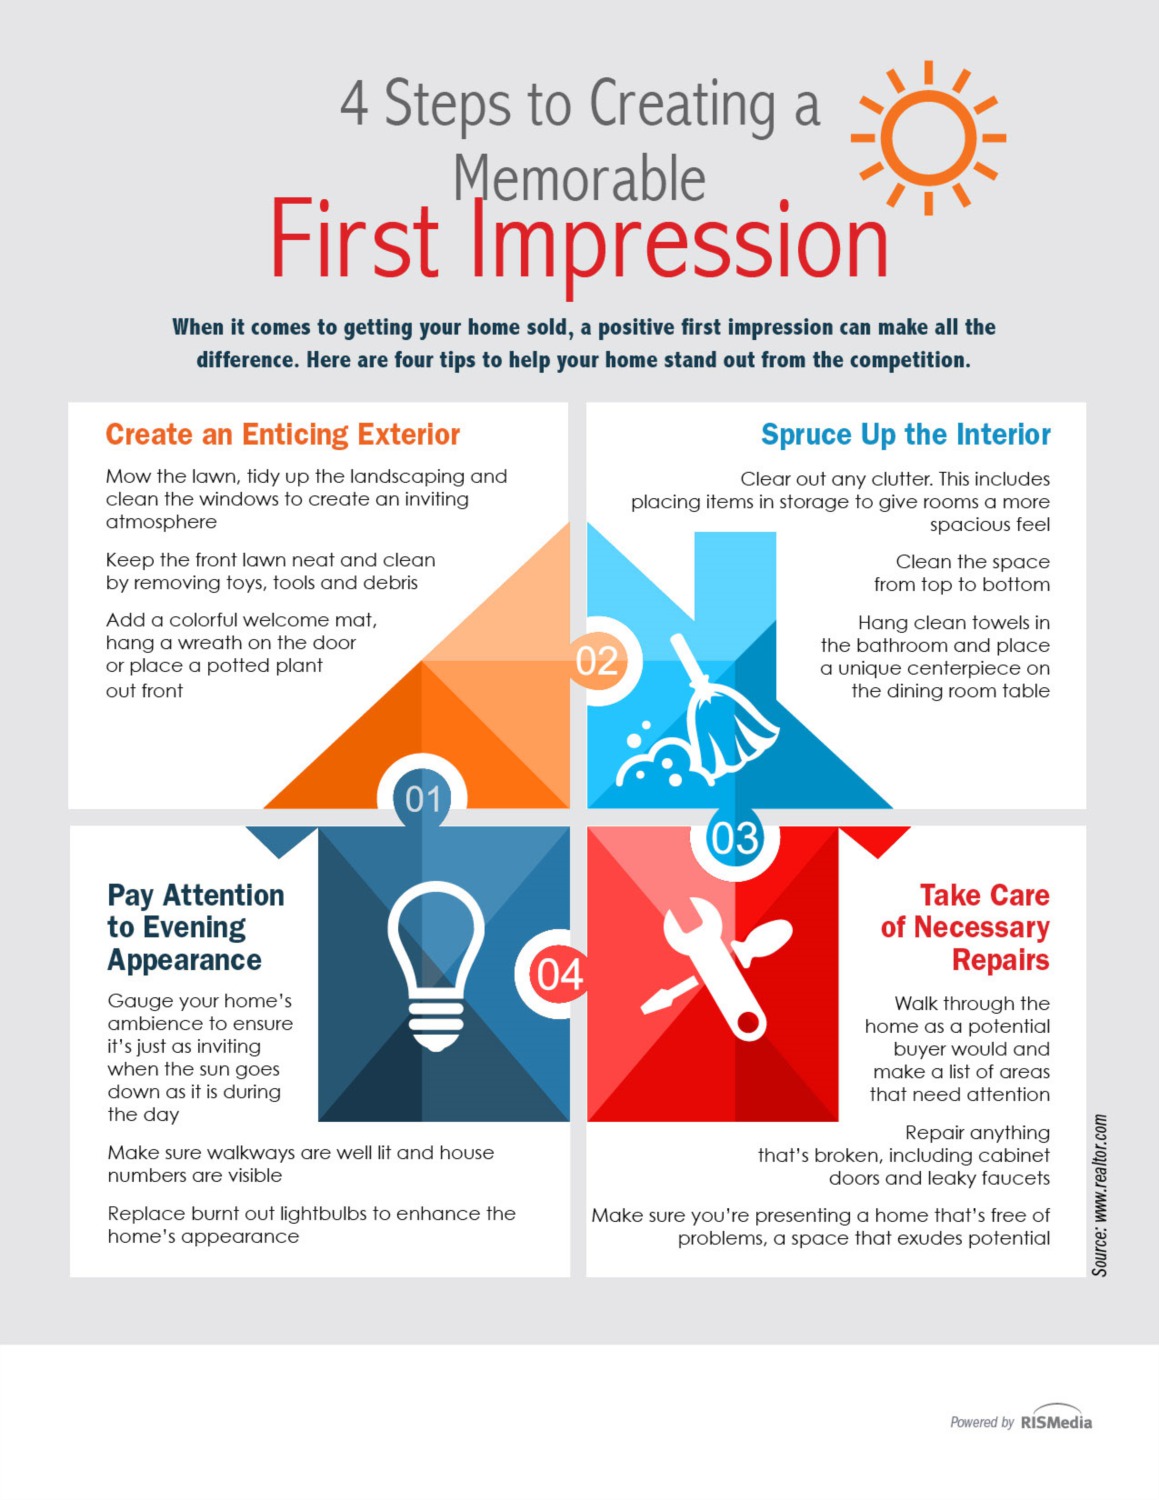 can we trust first impressions essay